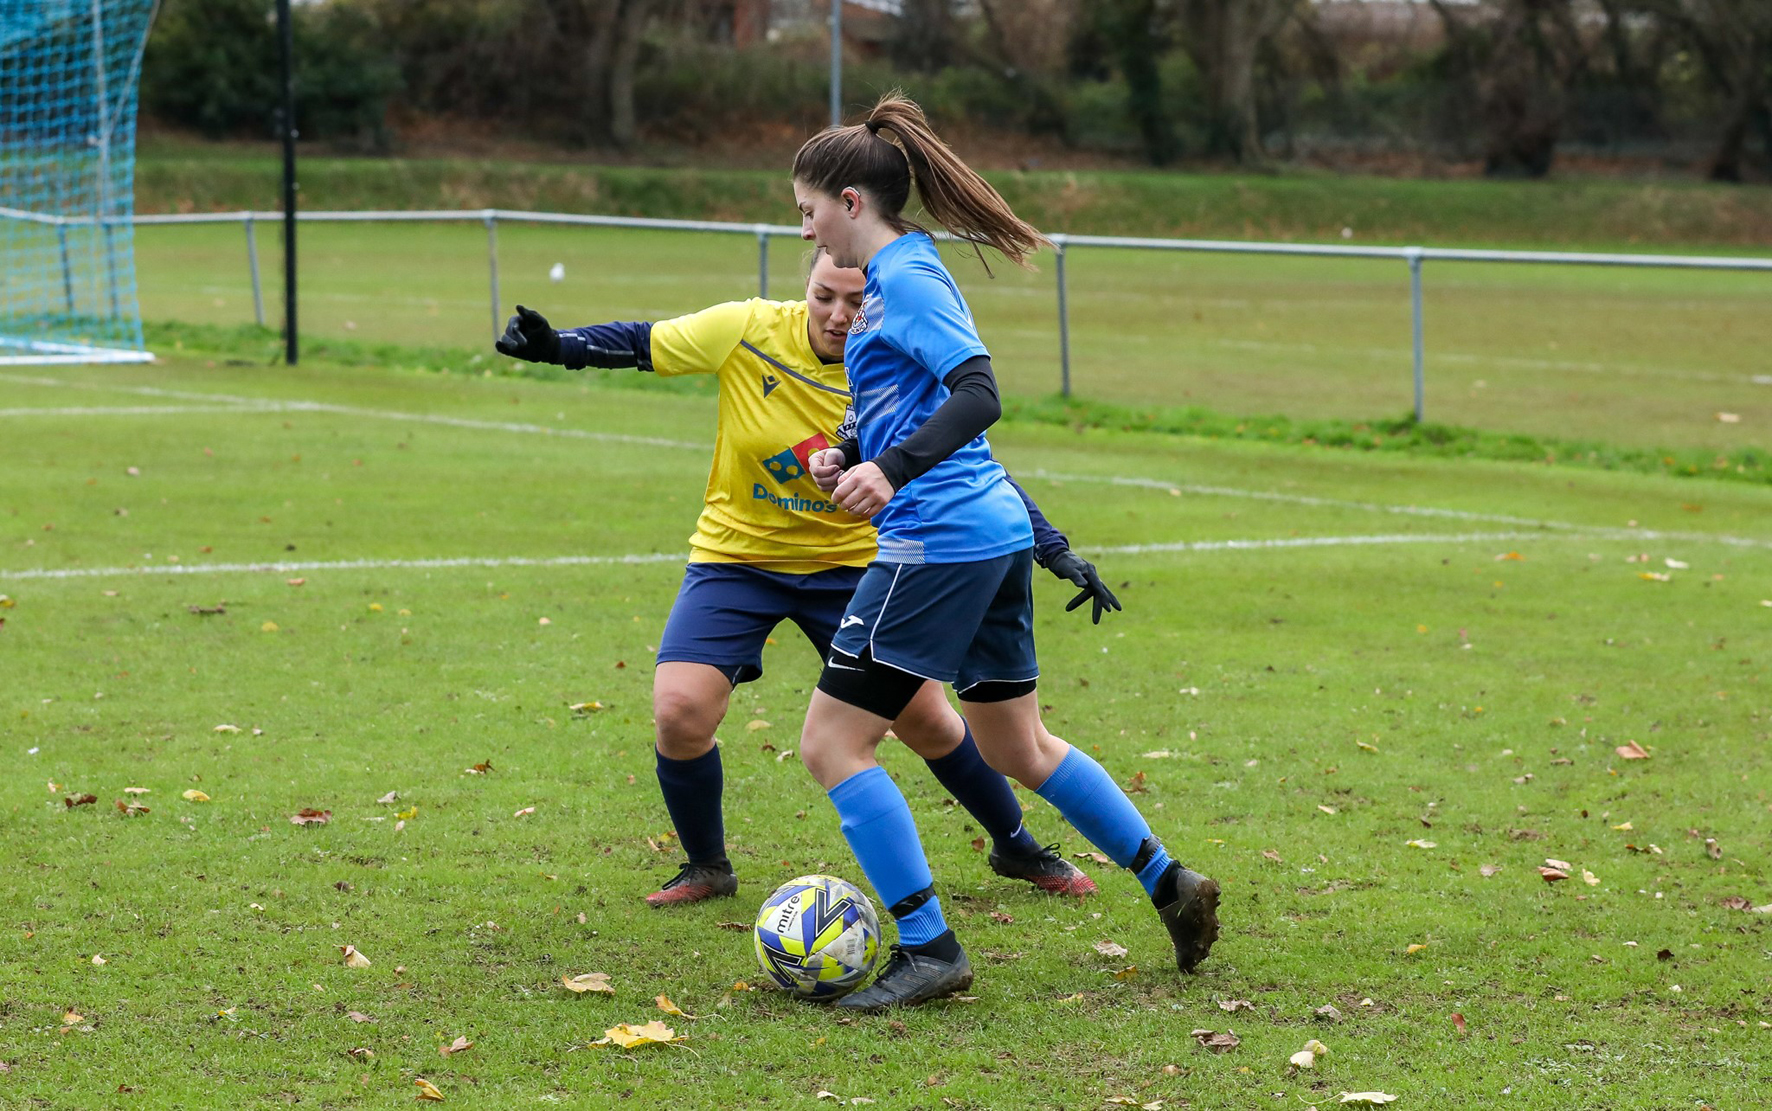 Footballer Lucy Scholes on the pitch, wearing a blue kit